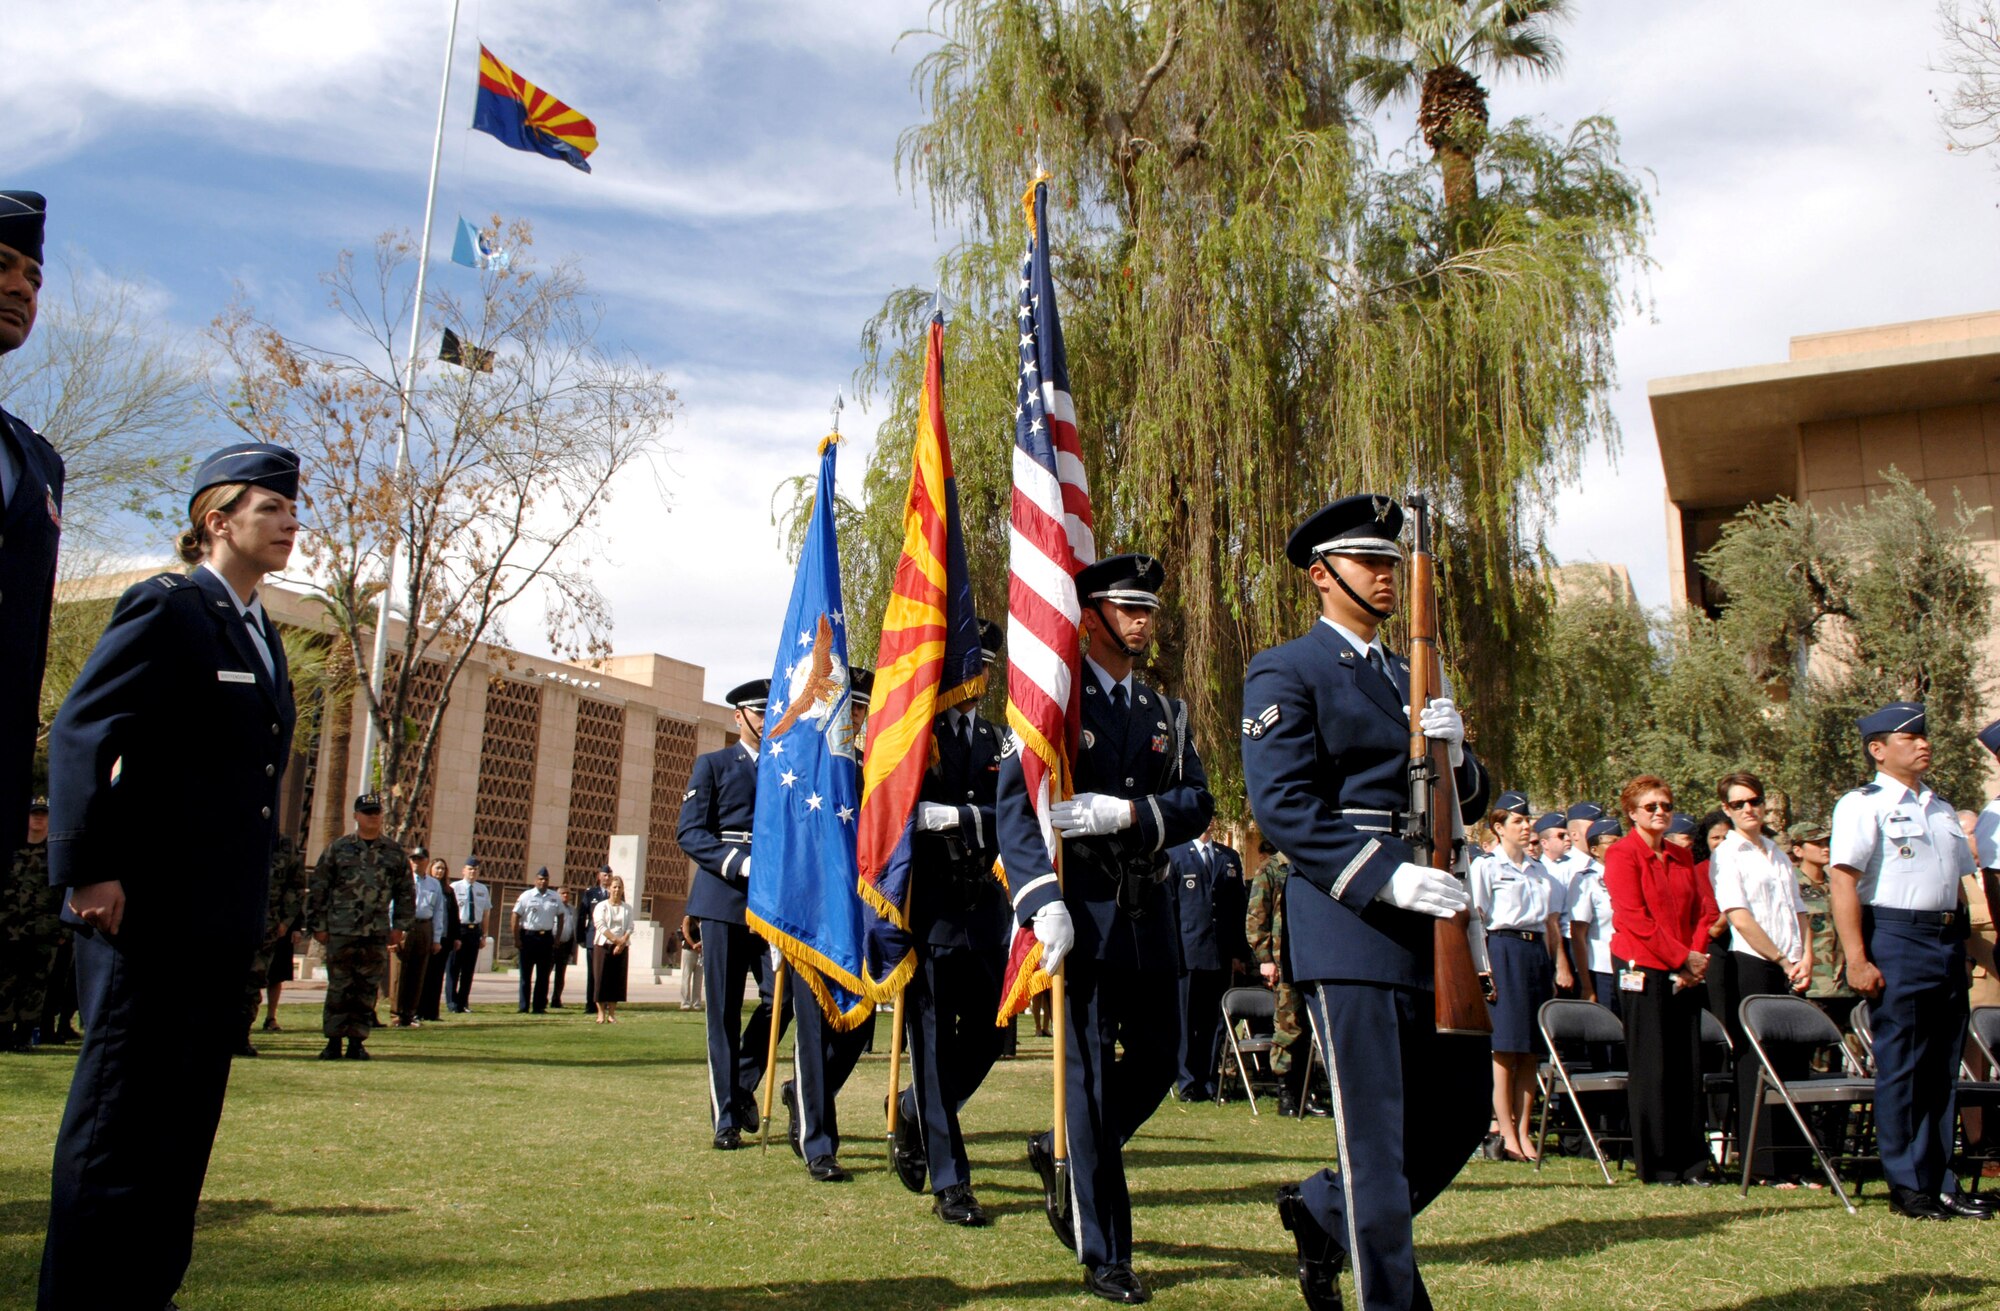 The Luke Air Force Base honor guard marches to the stage during the presentation of colors at the Air Force Week proclamation ceremony March 19 in Phoenix. Several bus loads of Airmen from nearby Luke Air Force Base joined Arizona state officials and Air Force senior leaders to kick off this year's first Air Force Week event. (U.S. Air Force photo/Staff Sgt. Brian Ferguson) 
